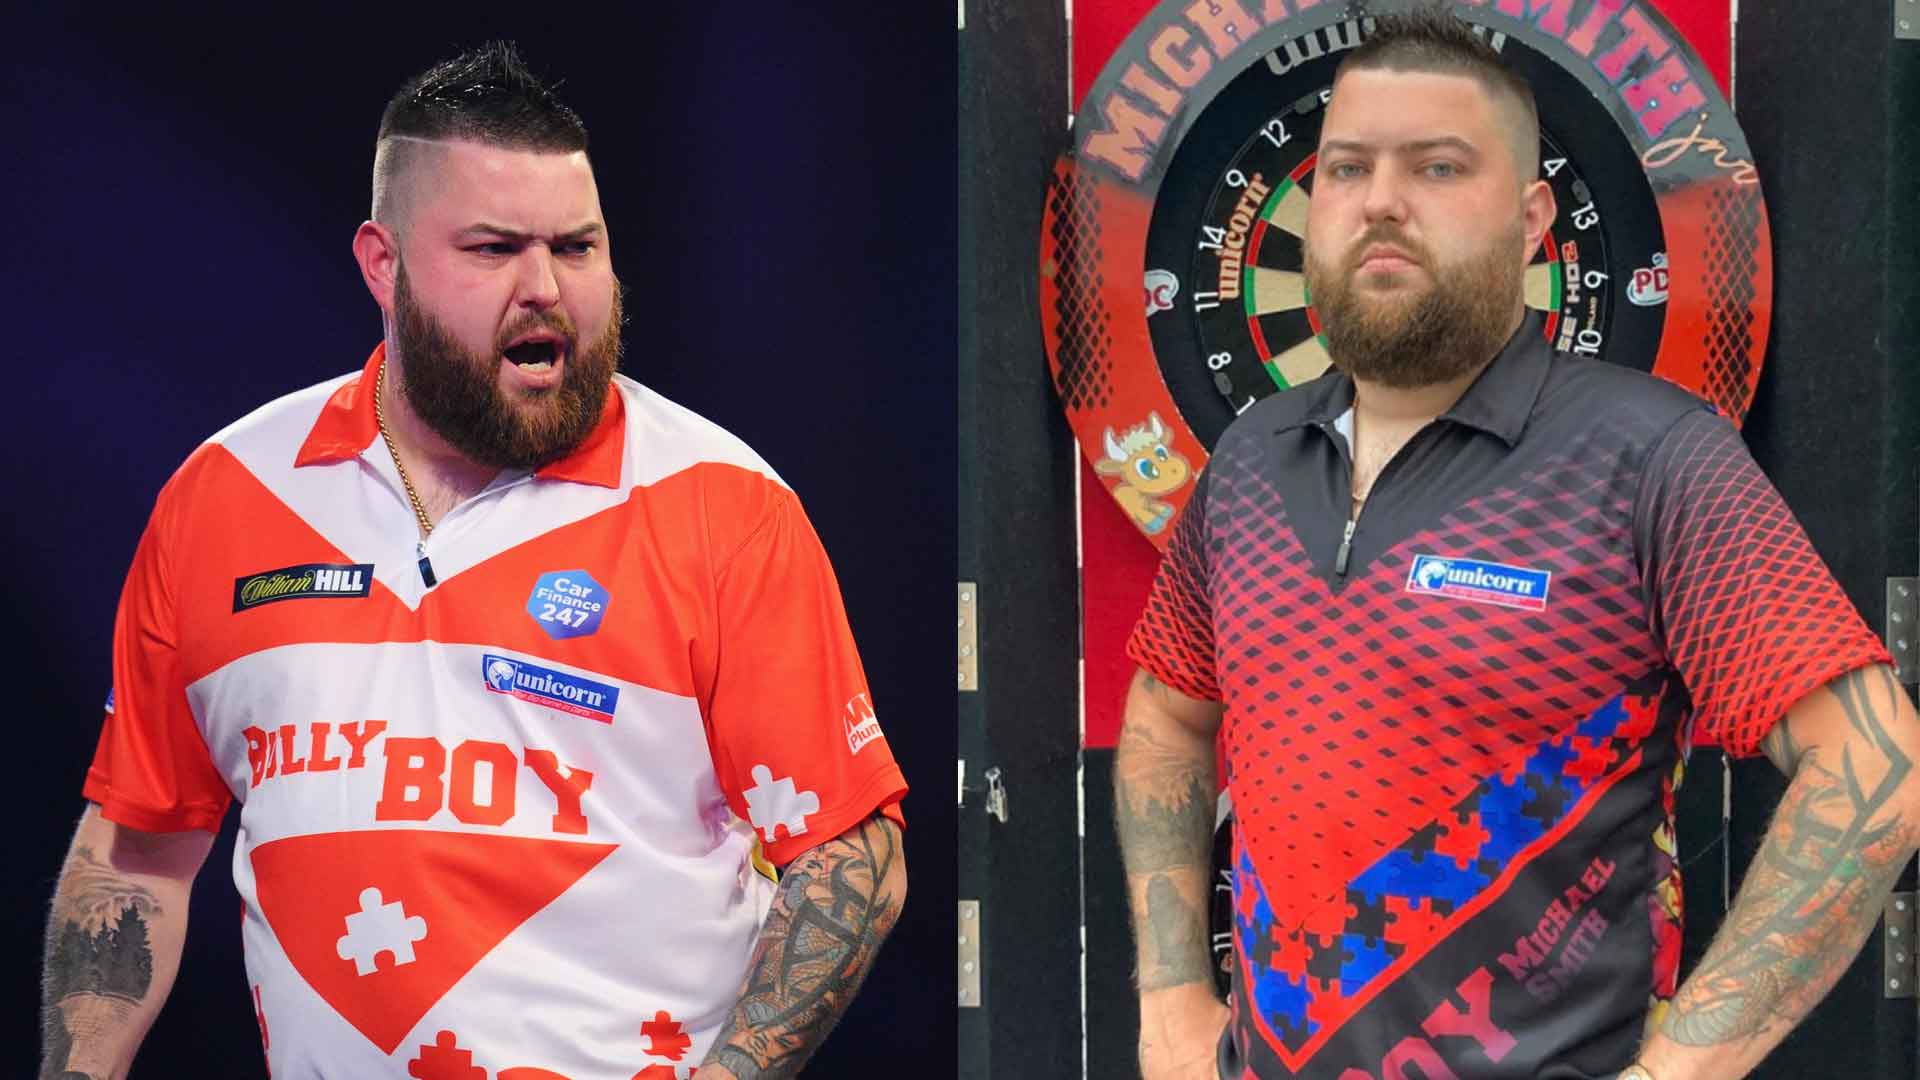 Darts star Michael Smith loses over two stone in weight in lockdown to improve family and grow career opportunities